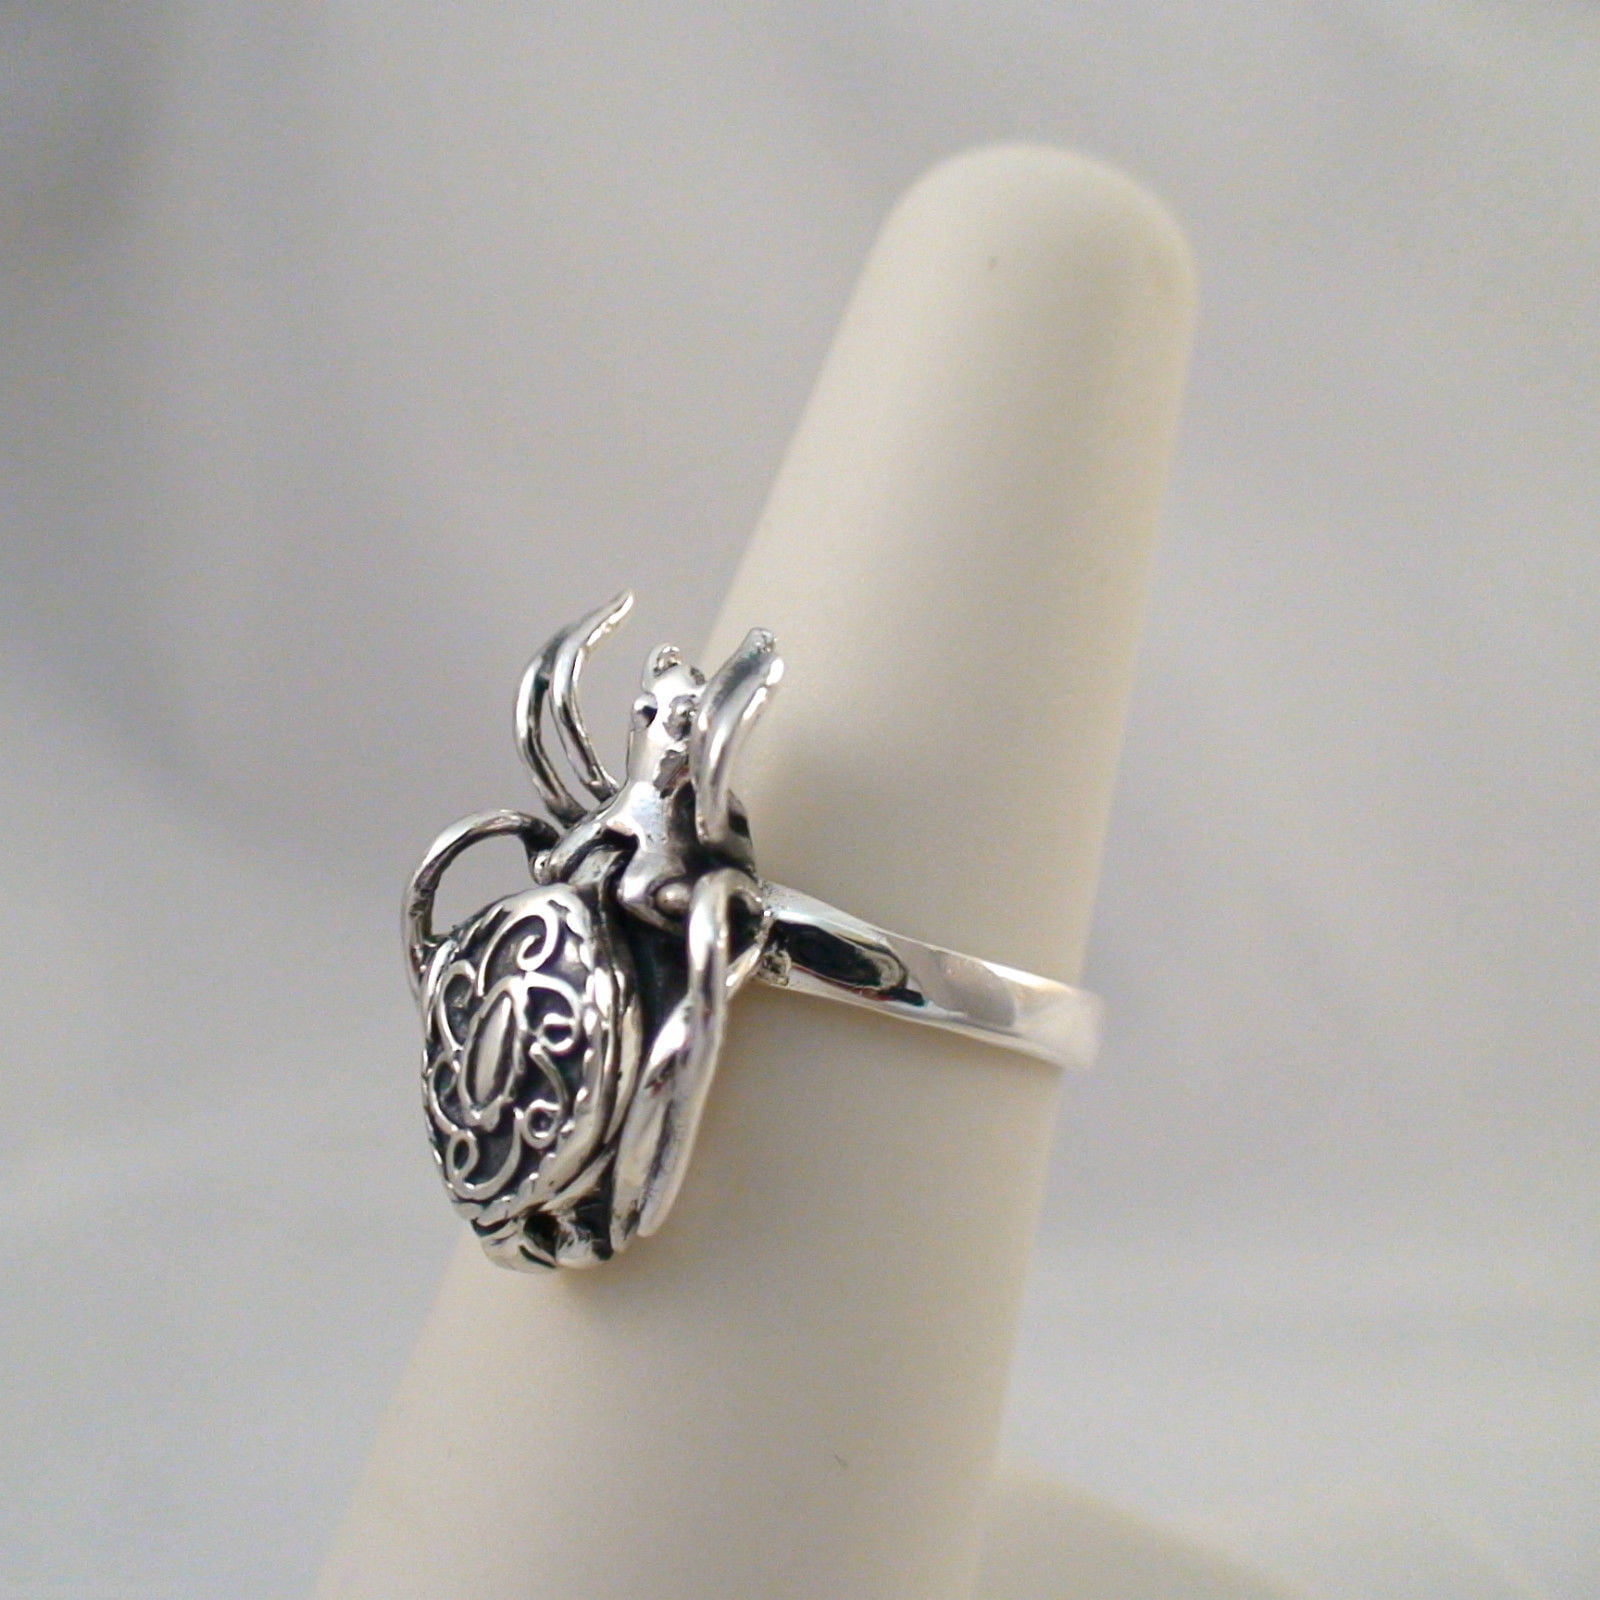 HANDCRAFTED SOLID STERLING SILVER 35mm.POISON RING with SPIDER DESIGN £45.95 NWT